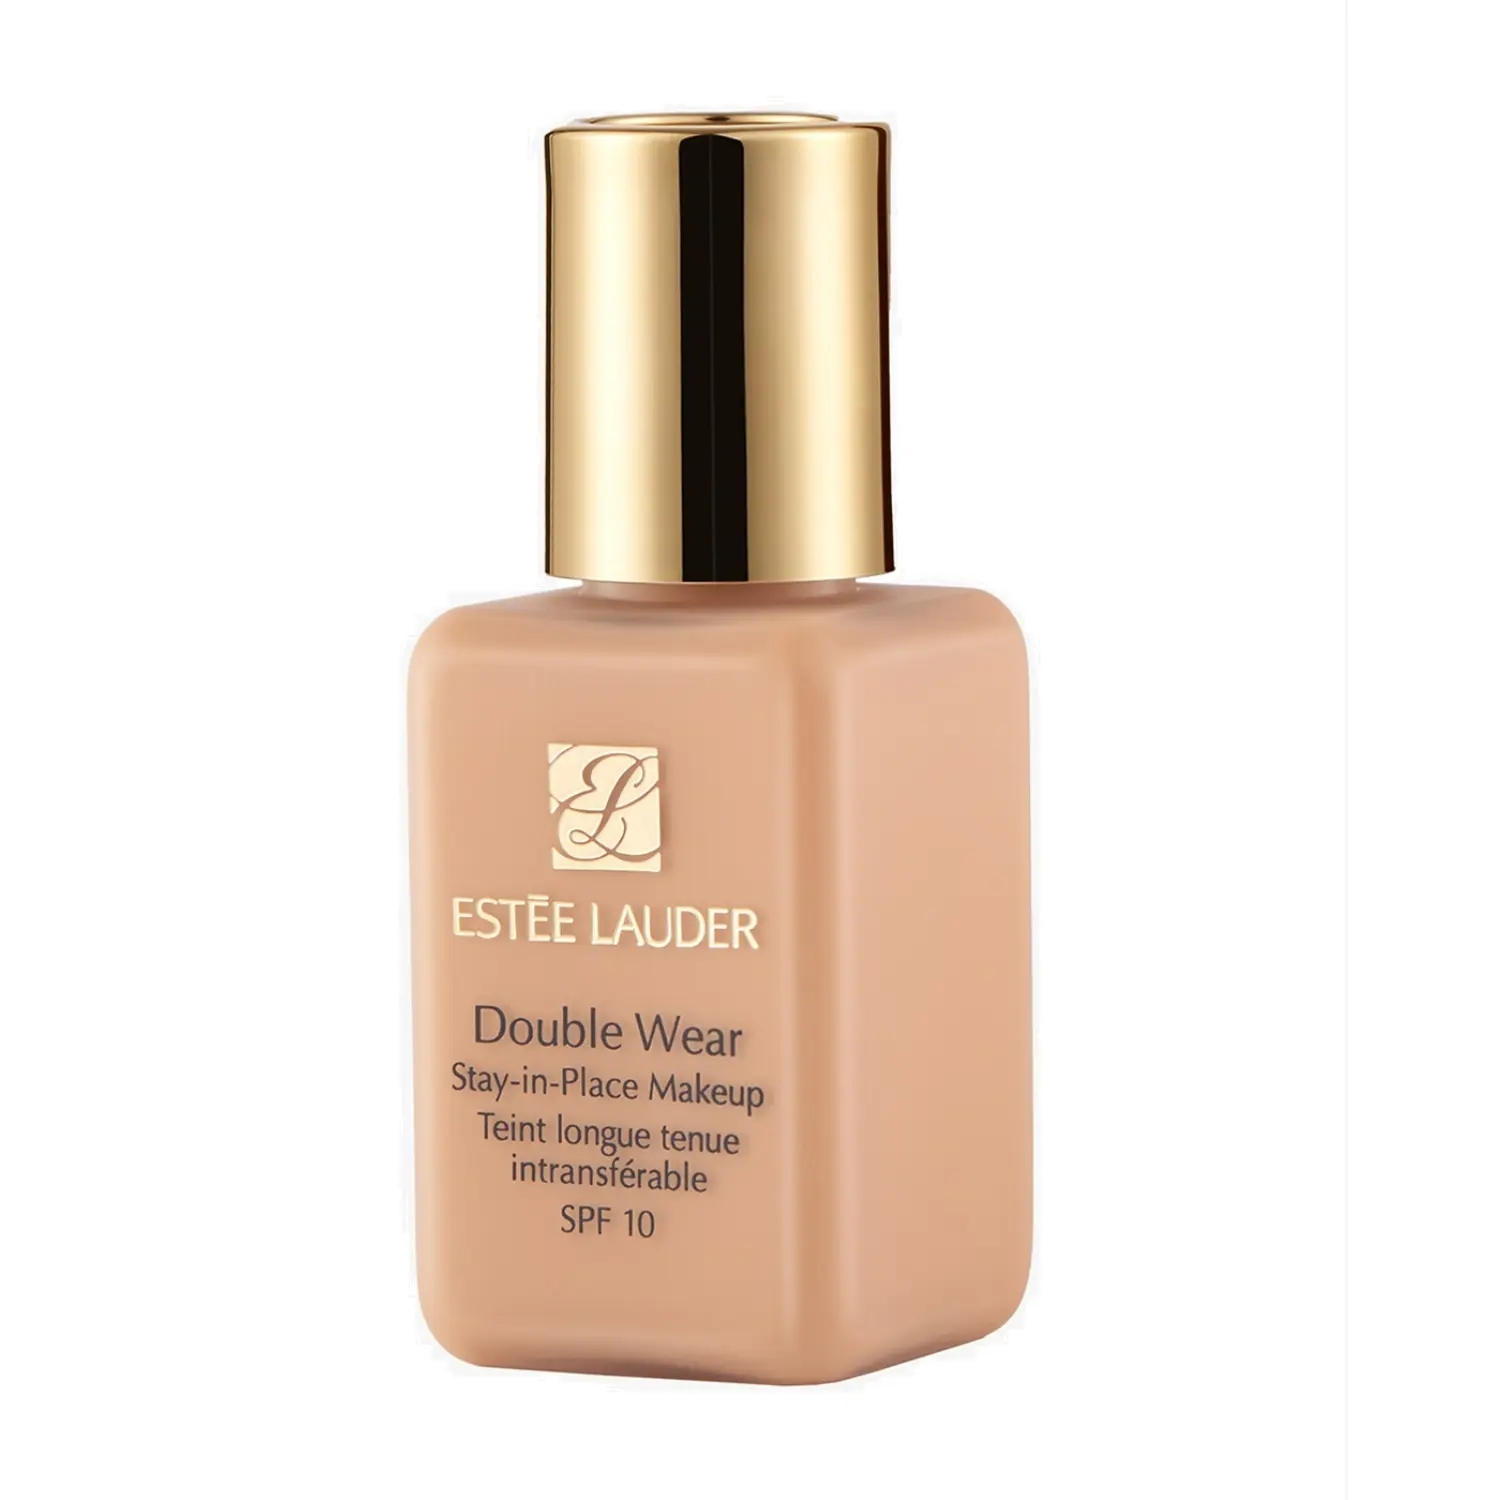 Estee Lauder | Estee Lauder Double Wear Stay-In-Place Makeup Foundation SPF 10 - 3W1 Tawny (15ml)